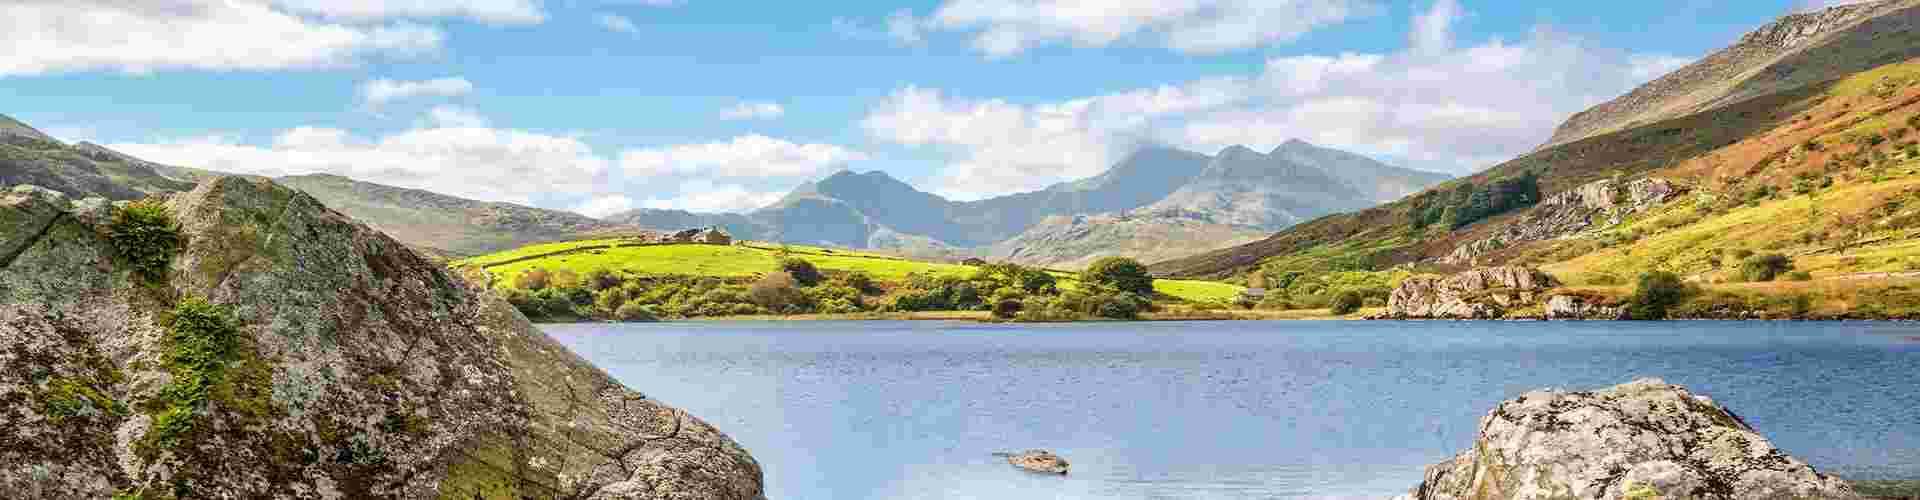 A lake in Snowdonia National Park, Wales